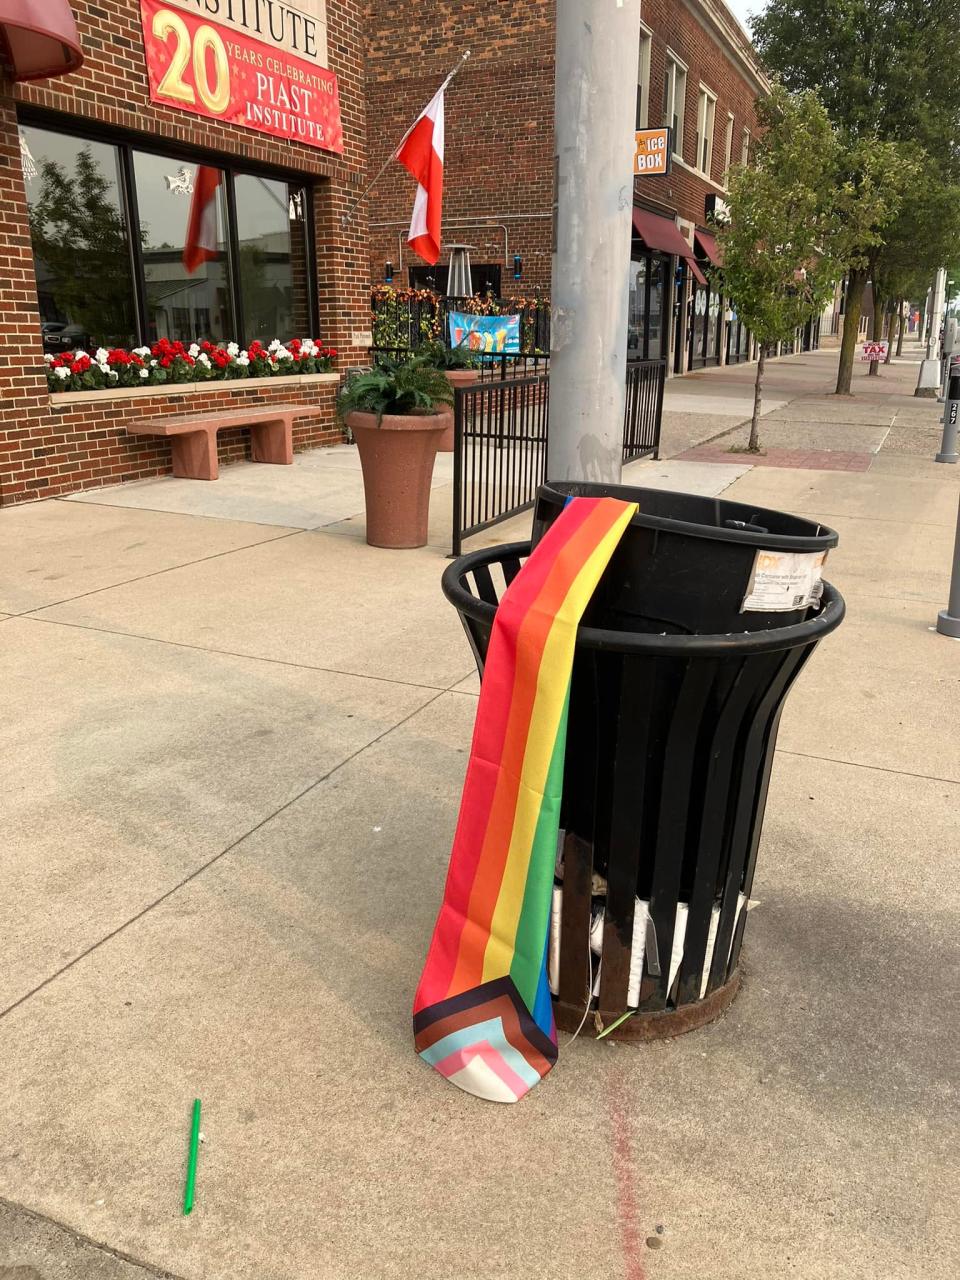 Former Hamtramck Mayor Karen Majewski said she found a LGBTQ Pride flag in a trash can outside the Piast Institute, a Polish-American center, where the flag had been flying, on June 6, 2023.